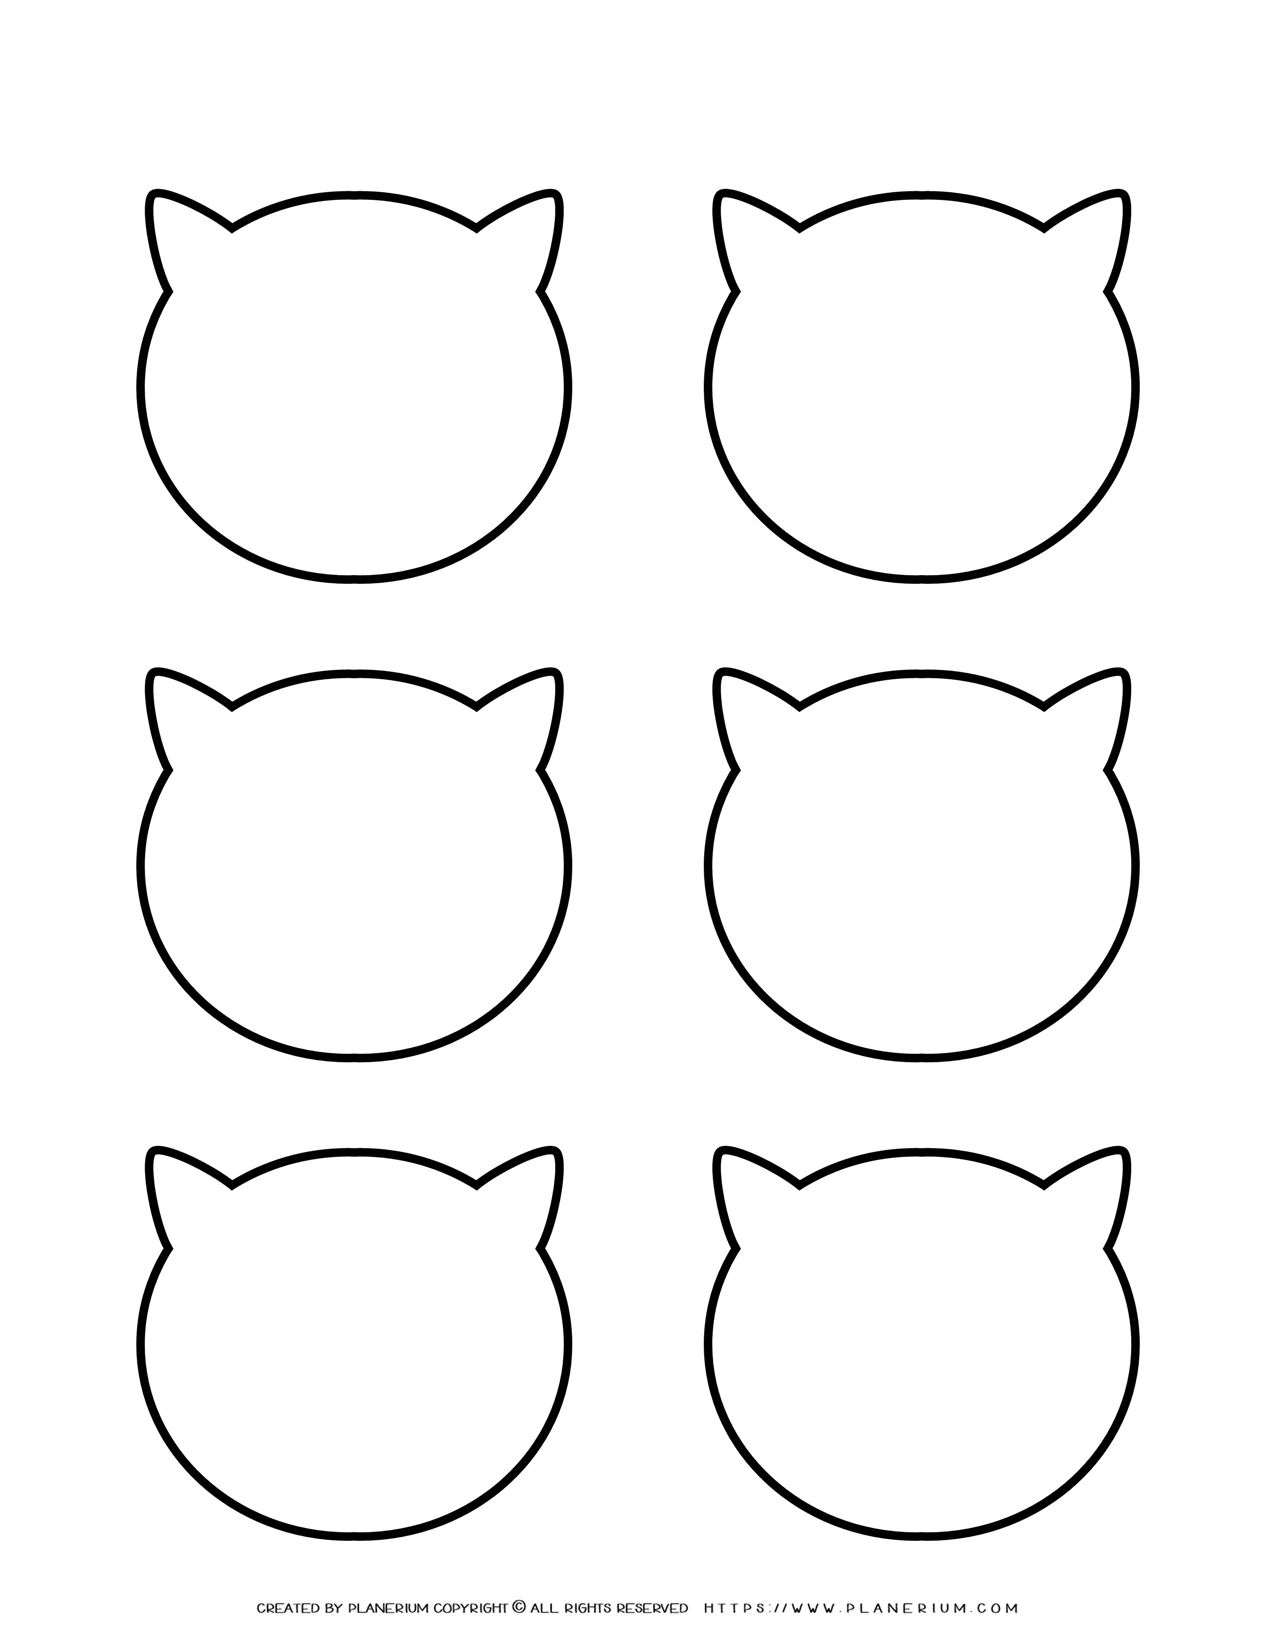 Cat Head Template Six Heads Outline FREE Printable Planerium